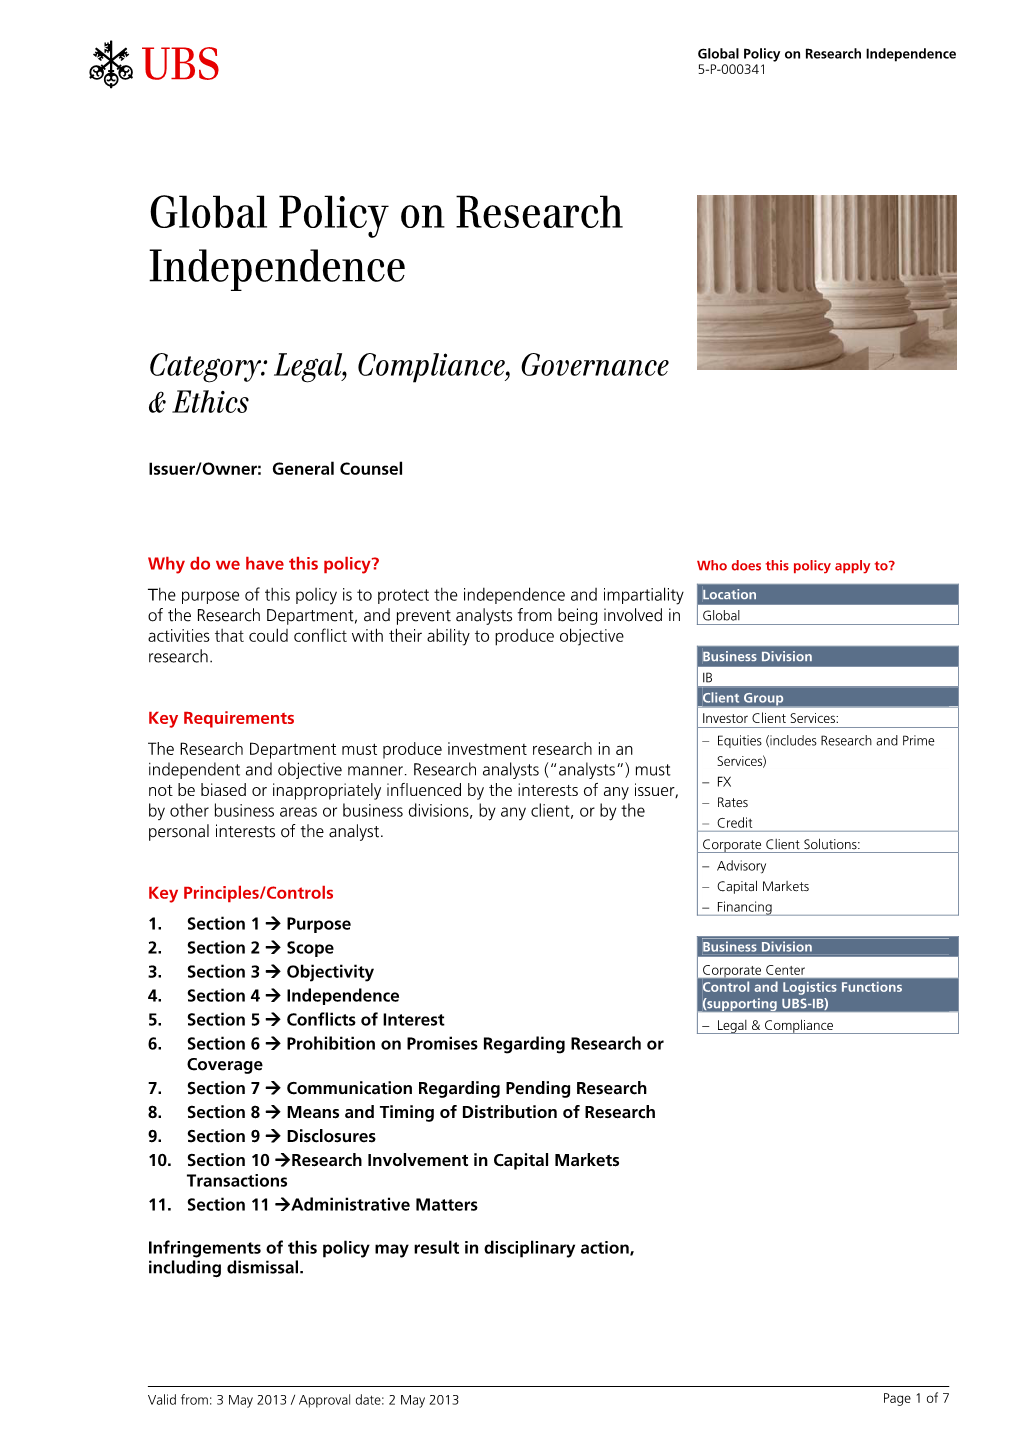 Global Policy on Research Independence 5-P-000341 